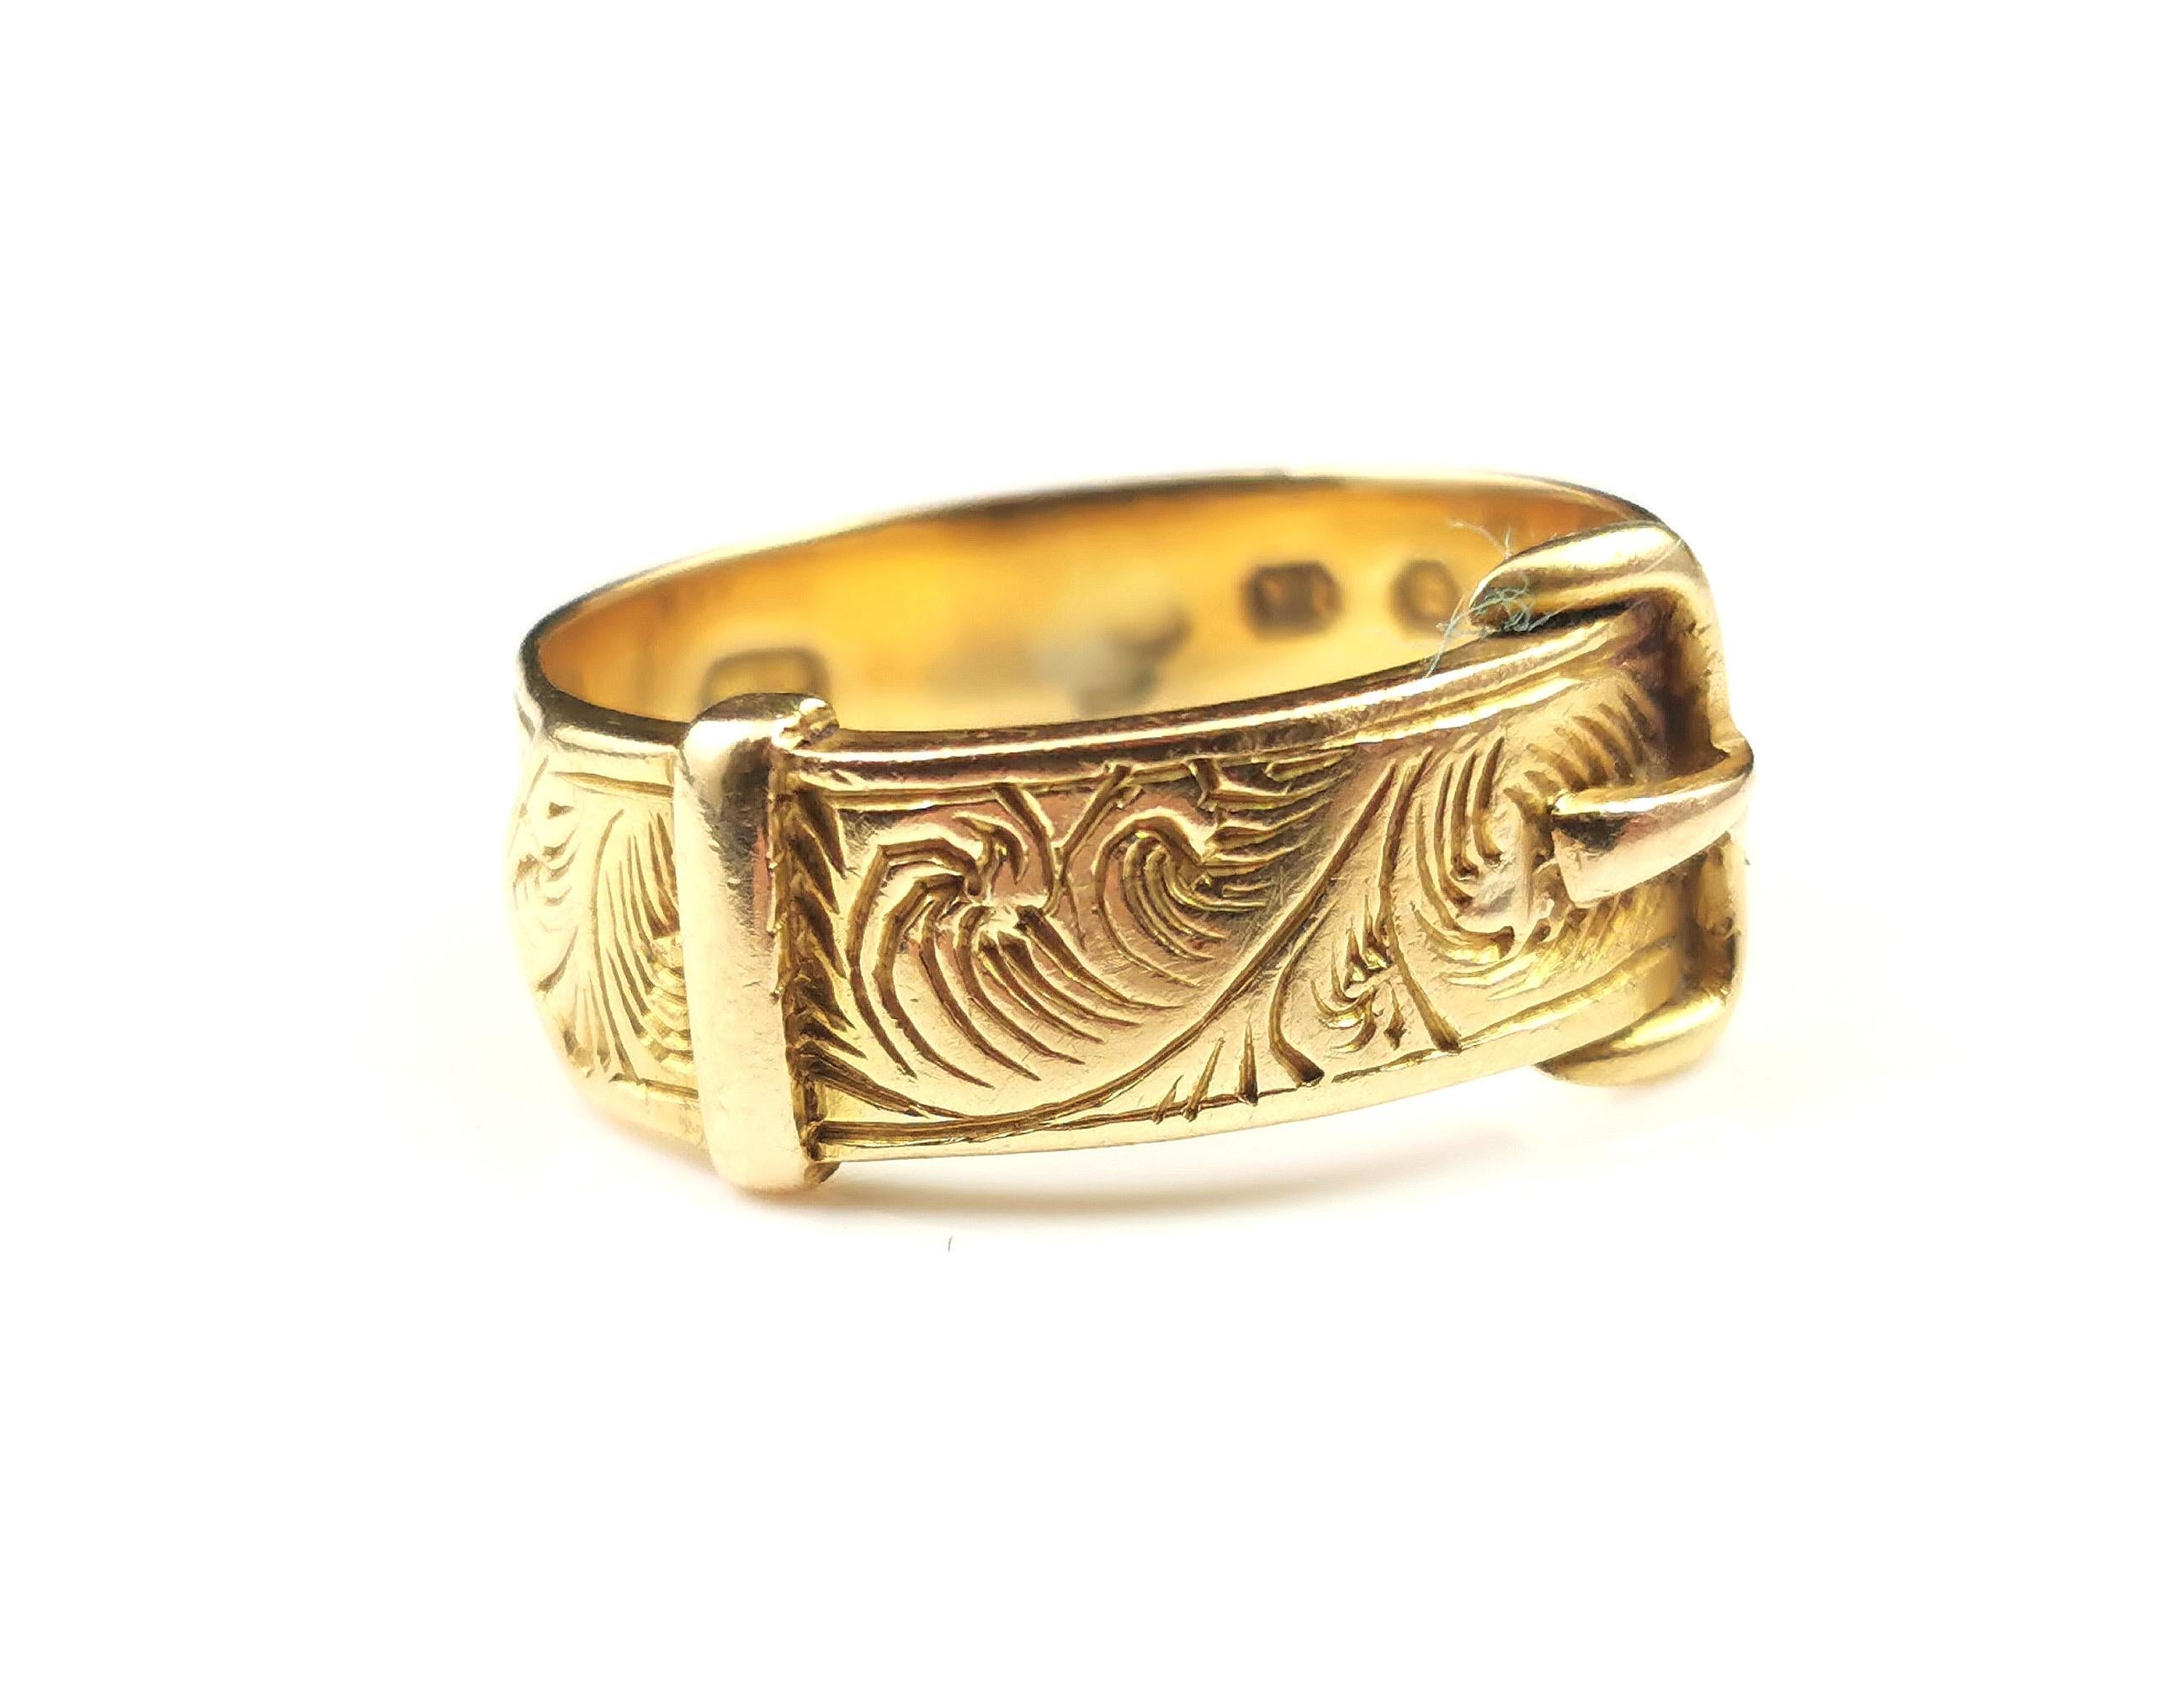 Antique 18k Gold Buckle Ring, Engraved Band 4